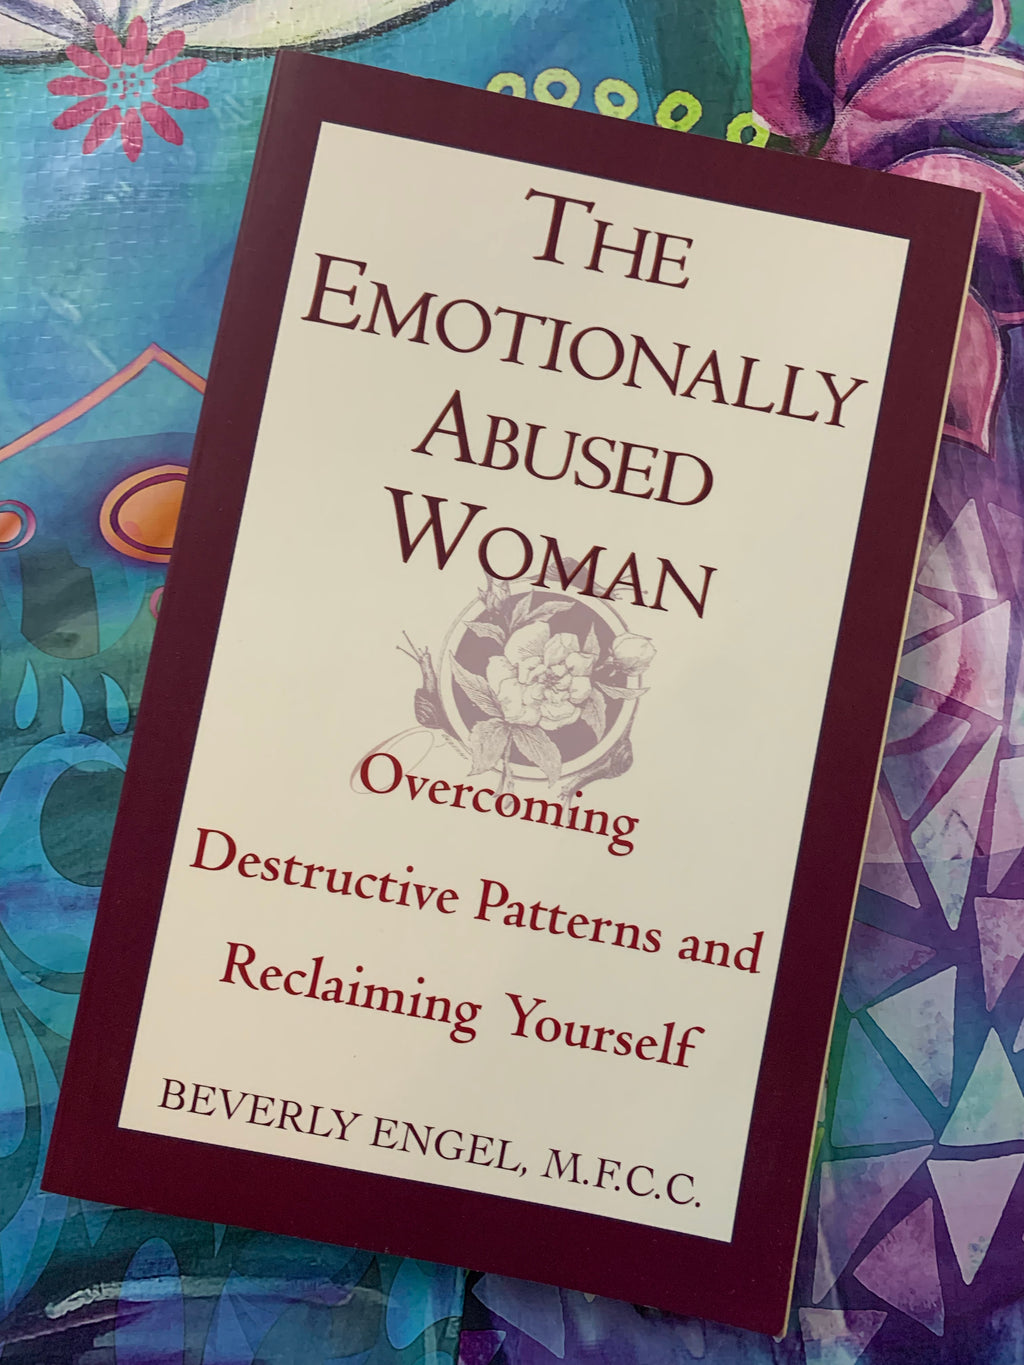 The Emotionally Abused Woman: Overcoming Destructive Patterns and Reclaiming Yourself- By Beverly Engel M.F.C.C.